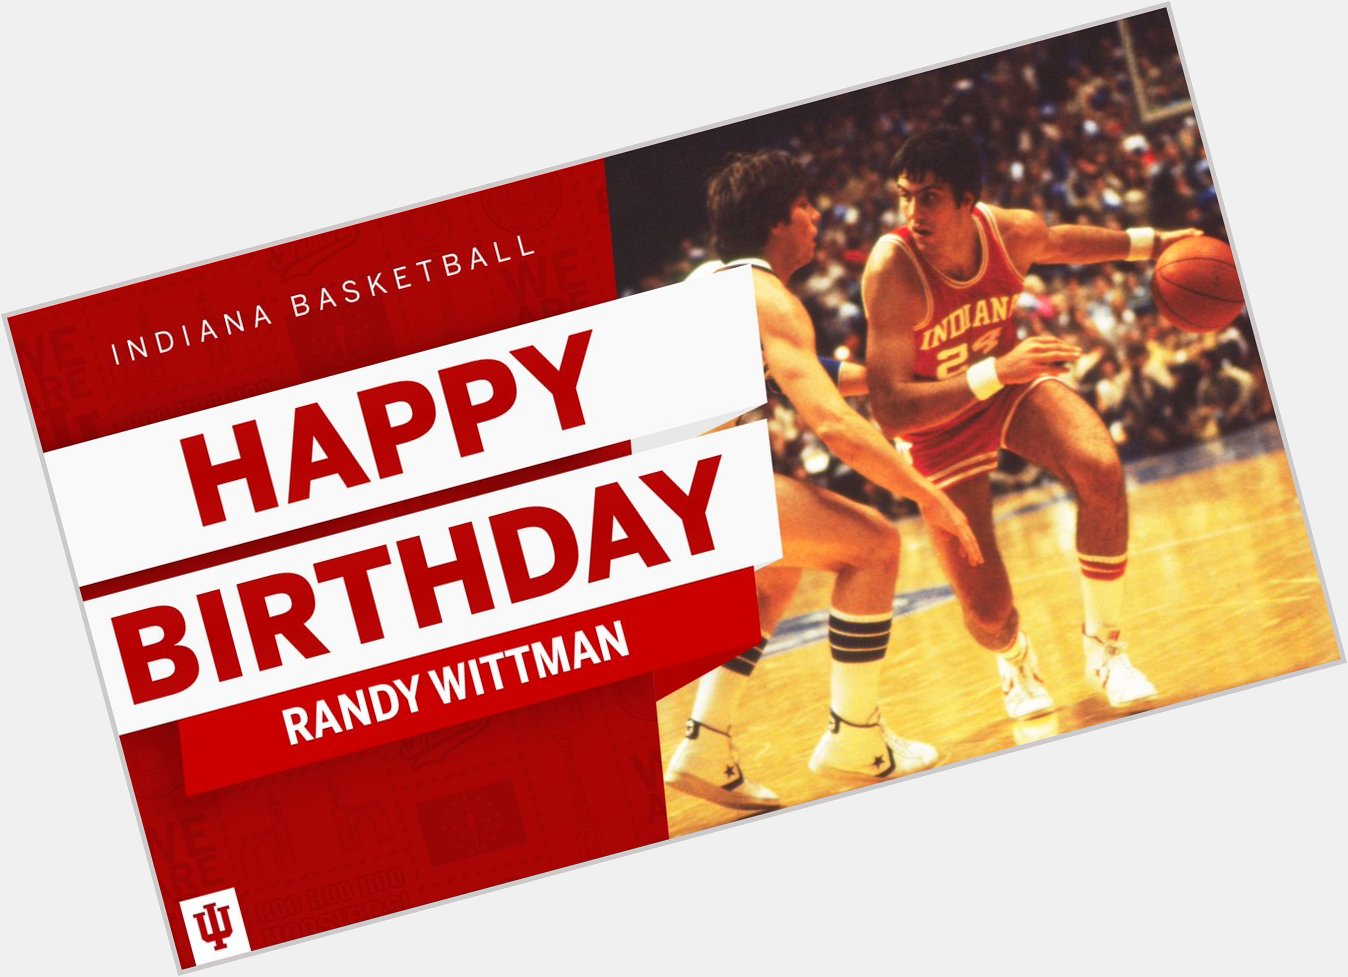 Although it\s Gameday for us, we need to wish Randy Wittman a Happy Birthday today as well! 